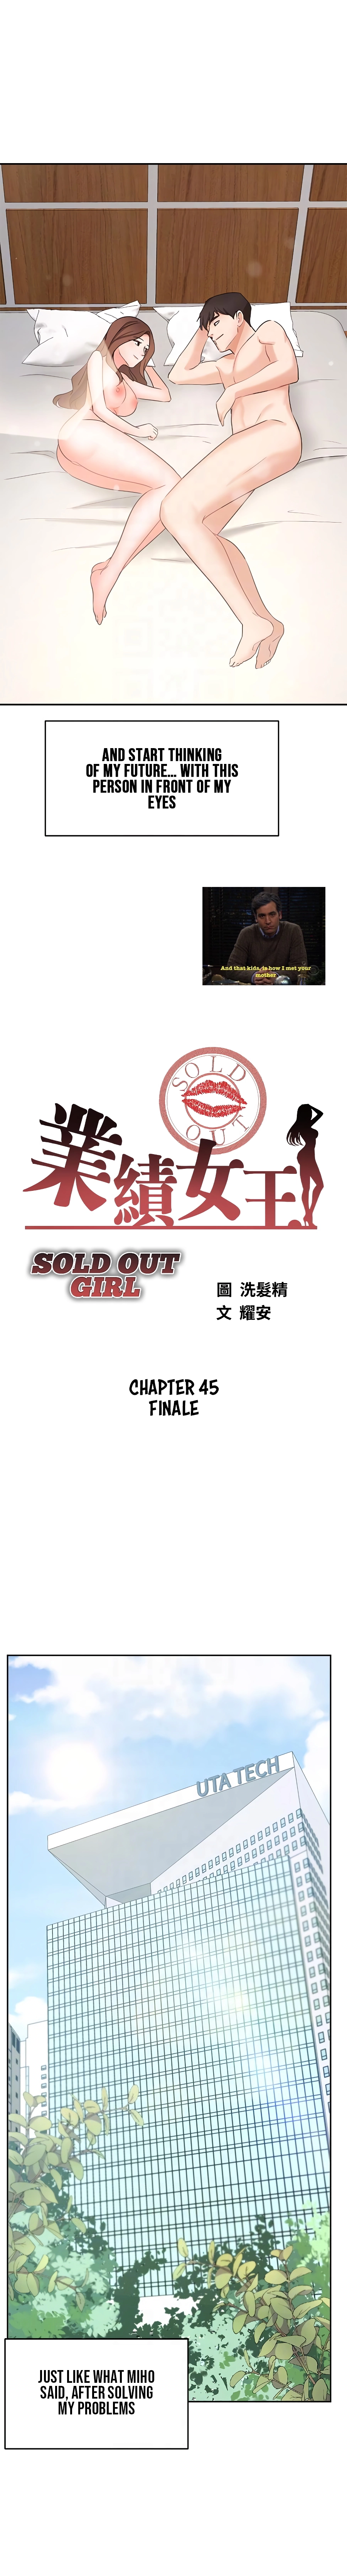 Sold Out Girl image